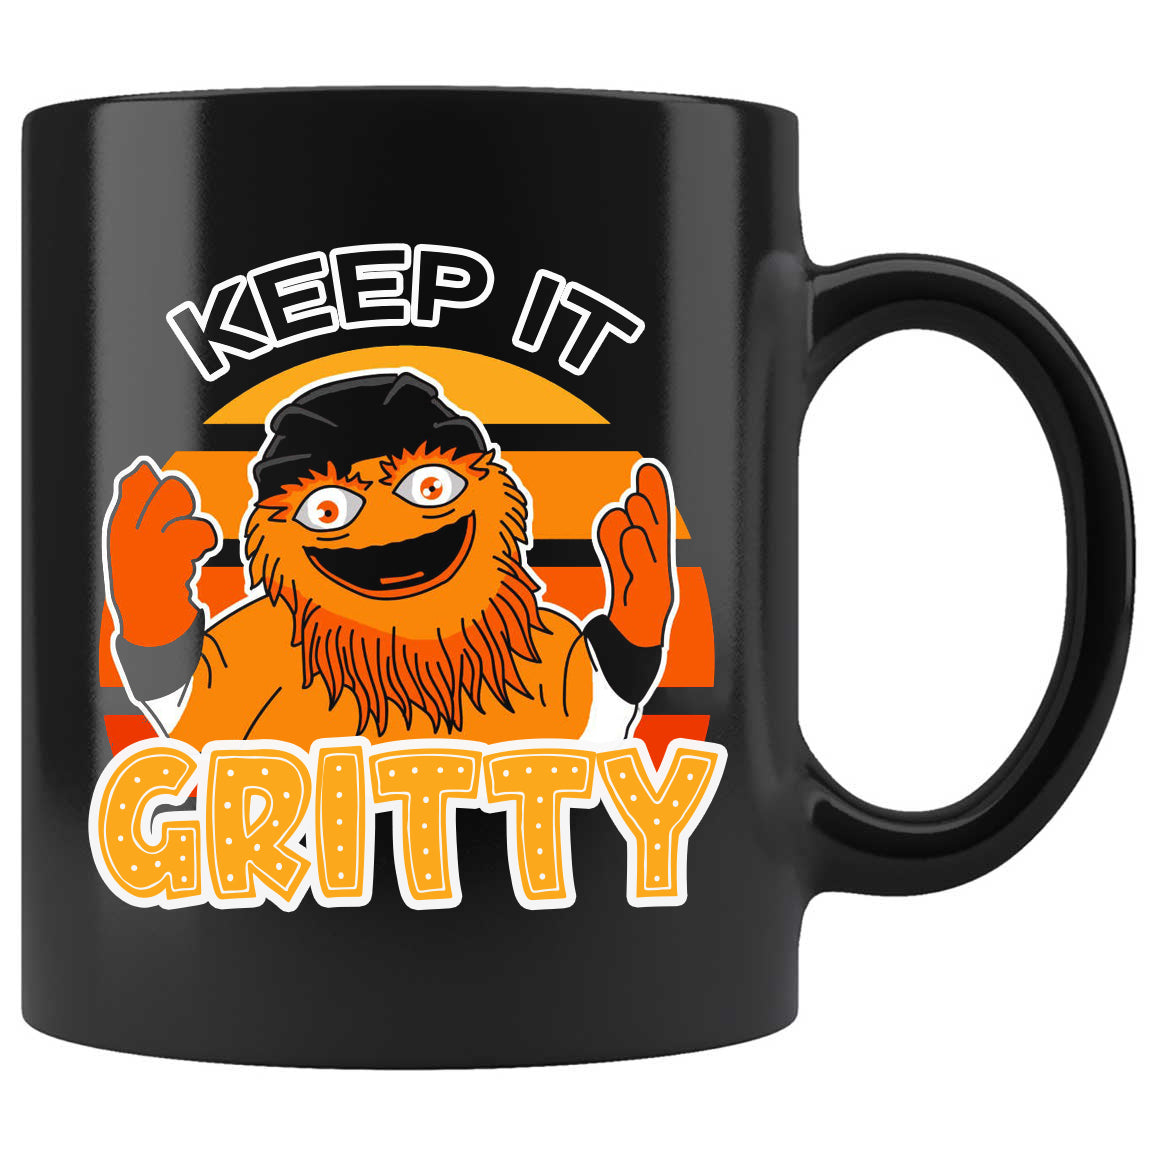 Skitongifts Funny Ceramic Coffee Mug For Birthday, Mother's Day, Father's Day, Christmas KL091221_Keep It Gritty